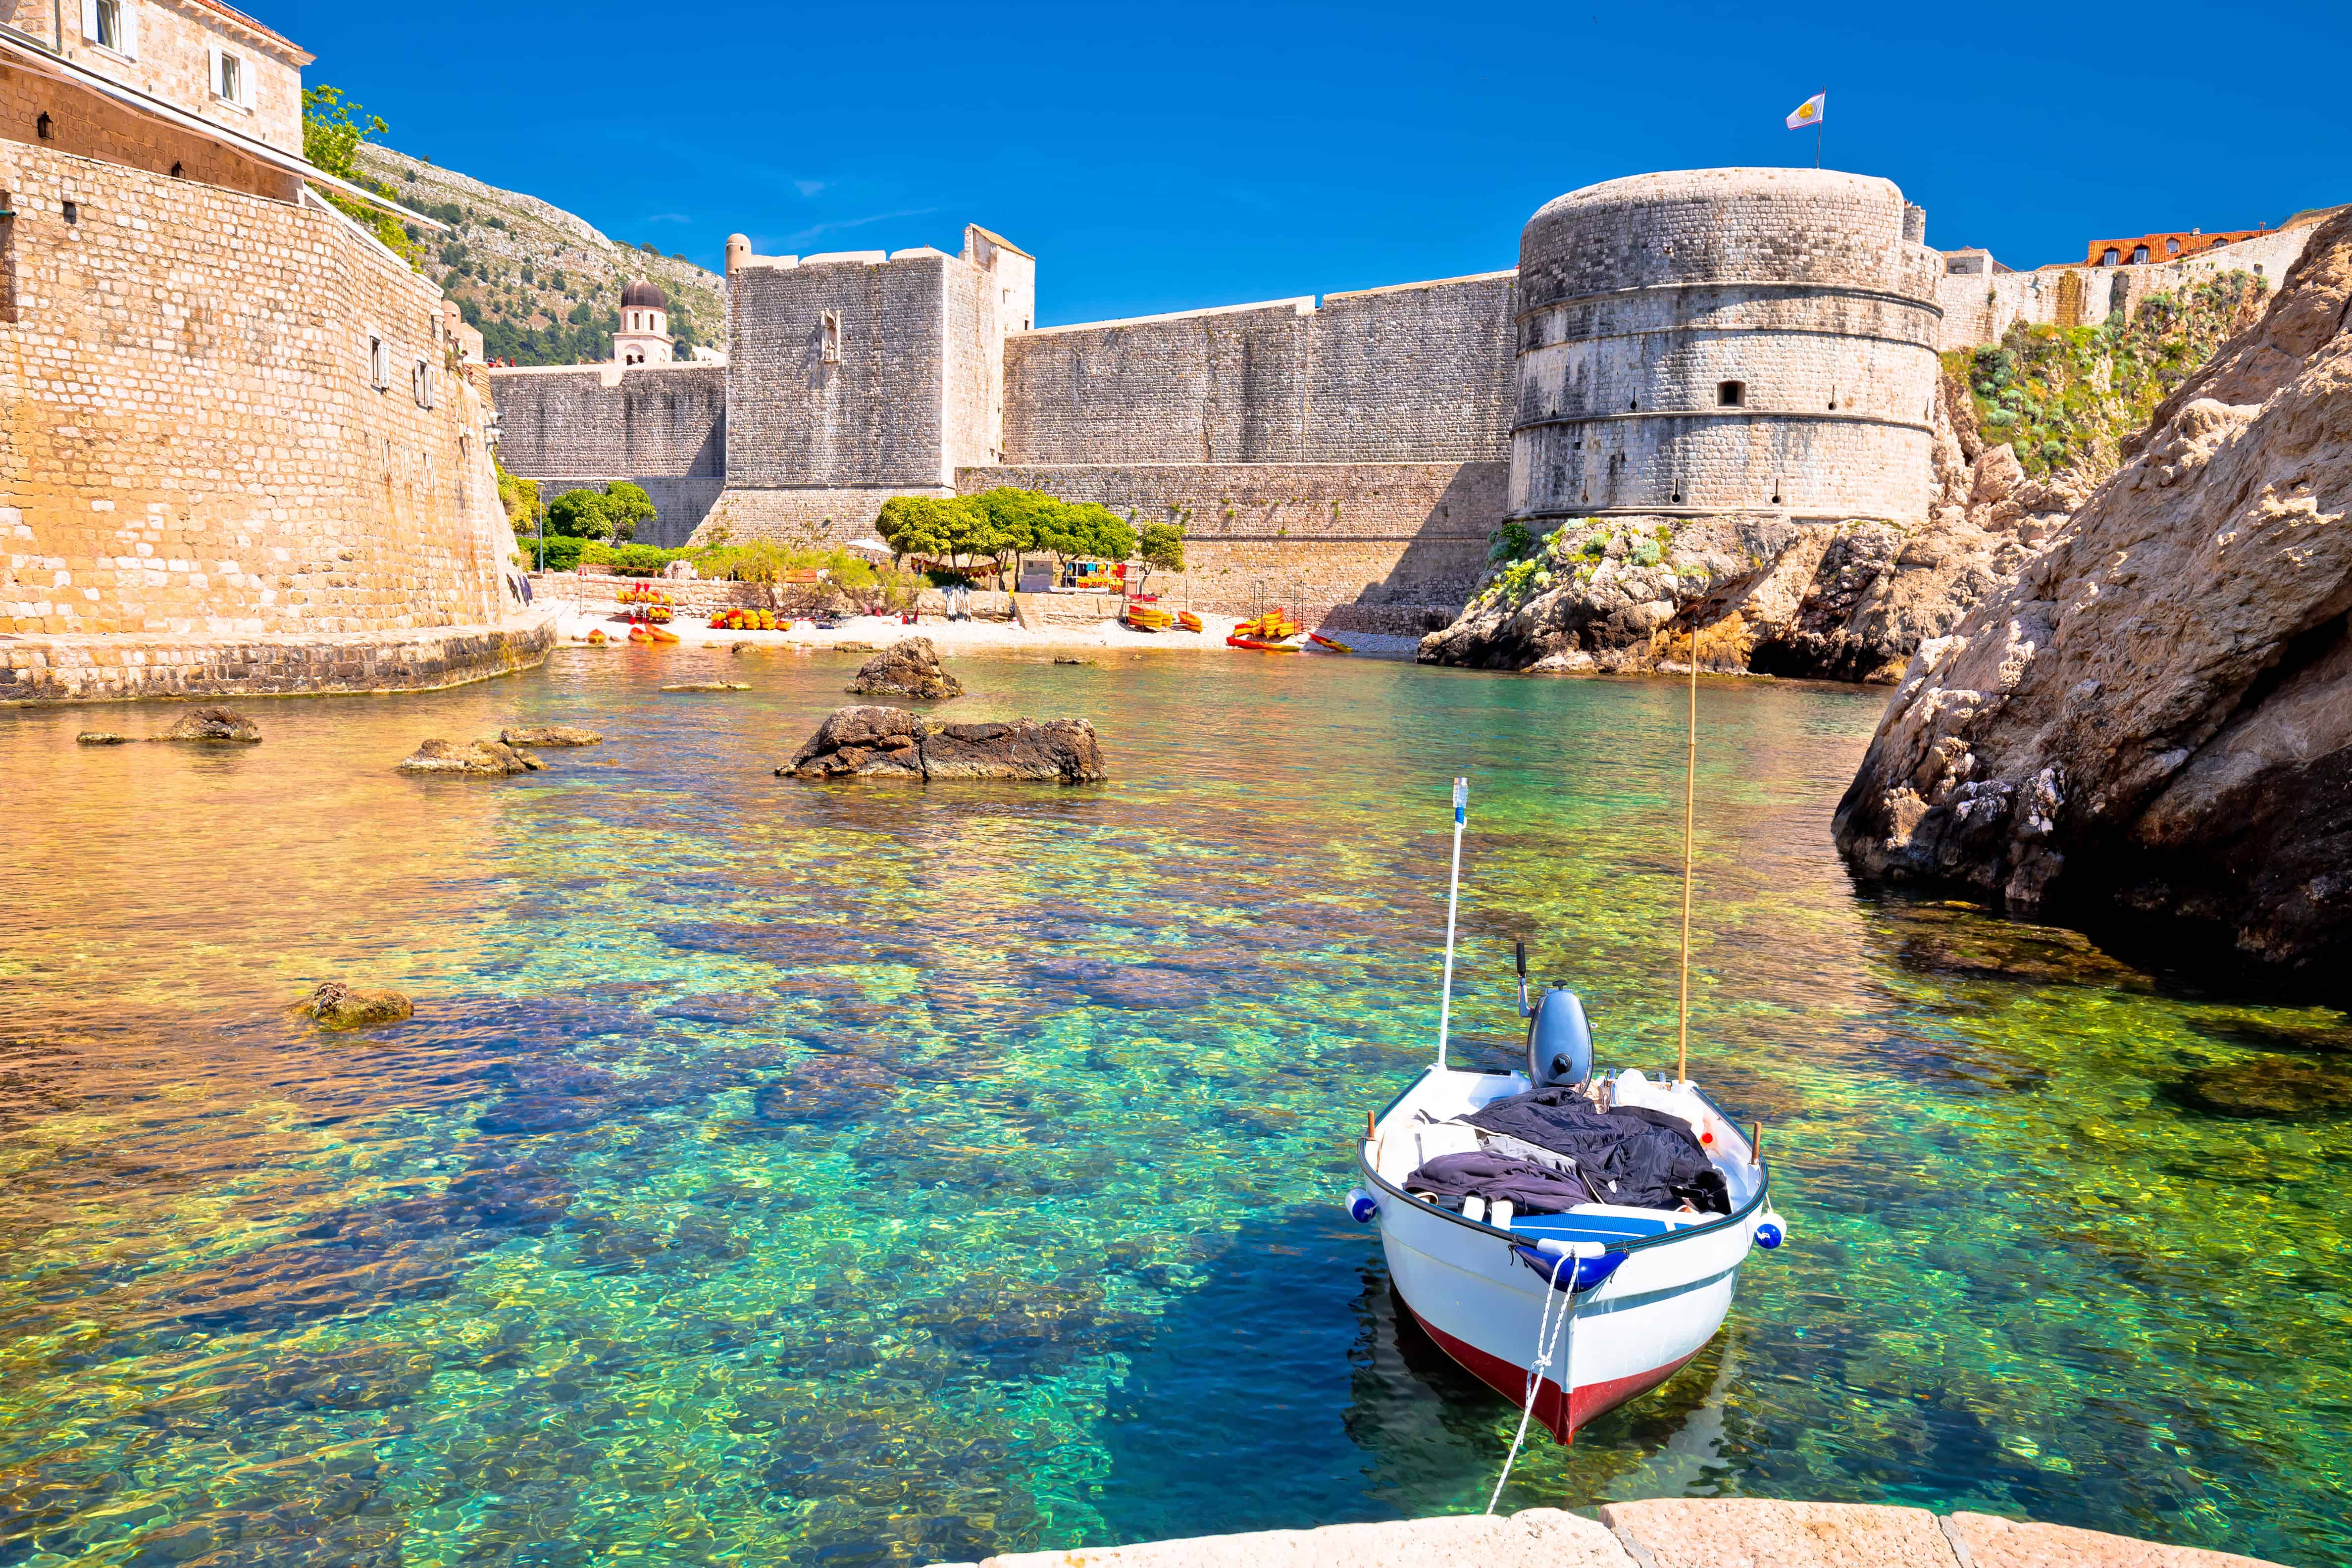 Top Old Town highlights of Dubrovnik